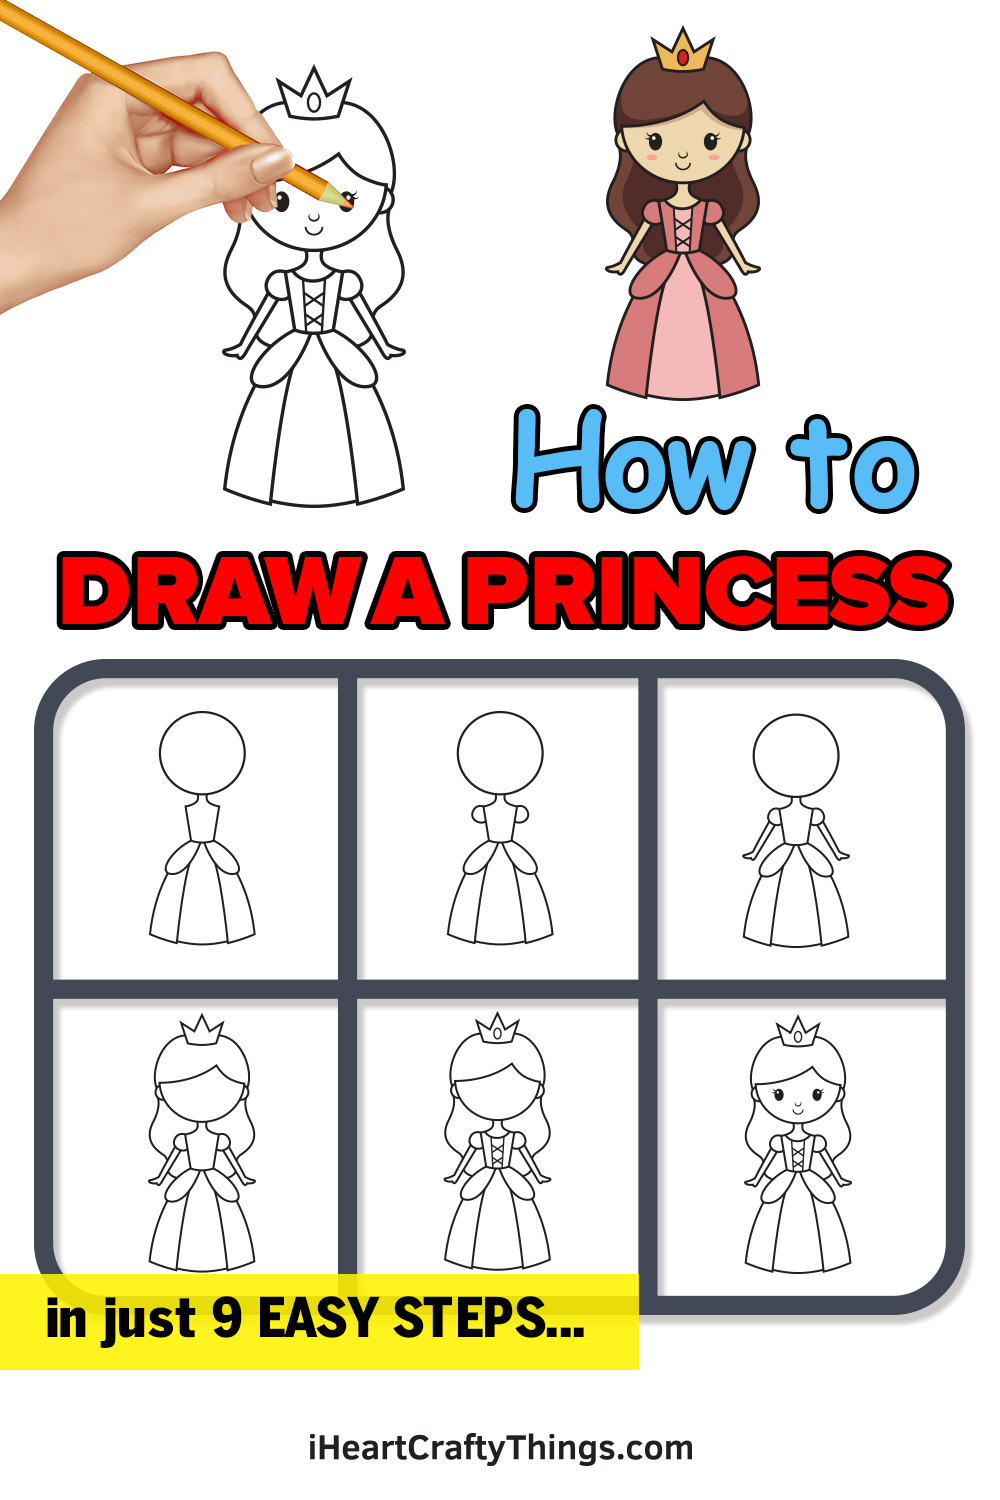 How to draw princess in 9 easy steps